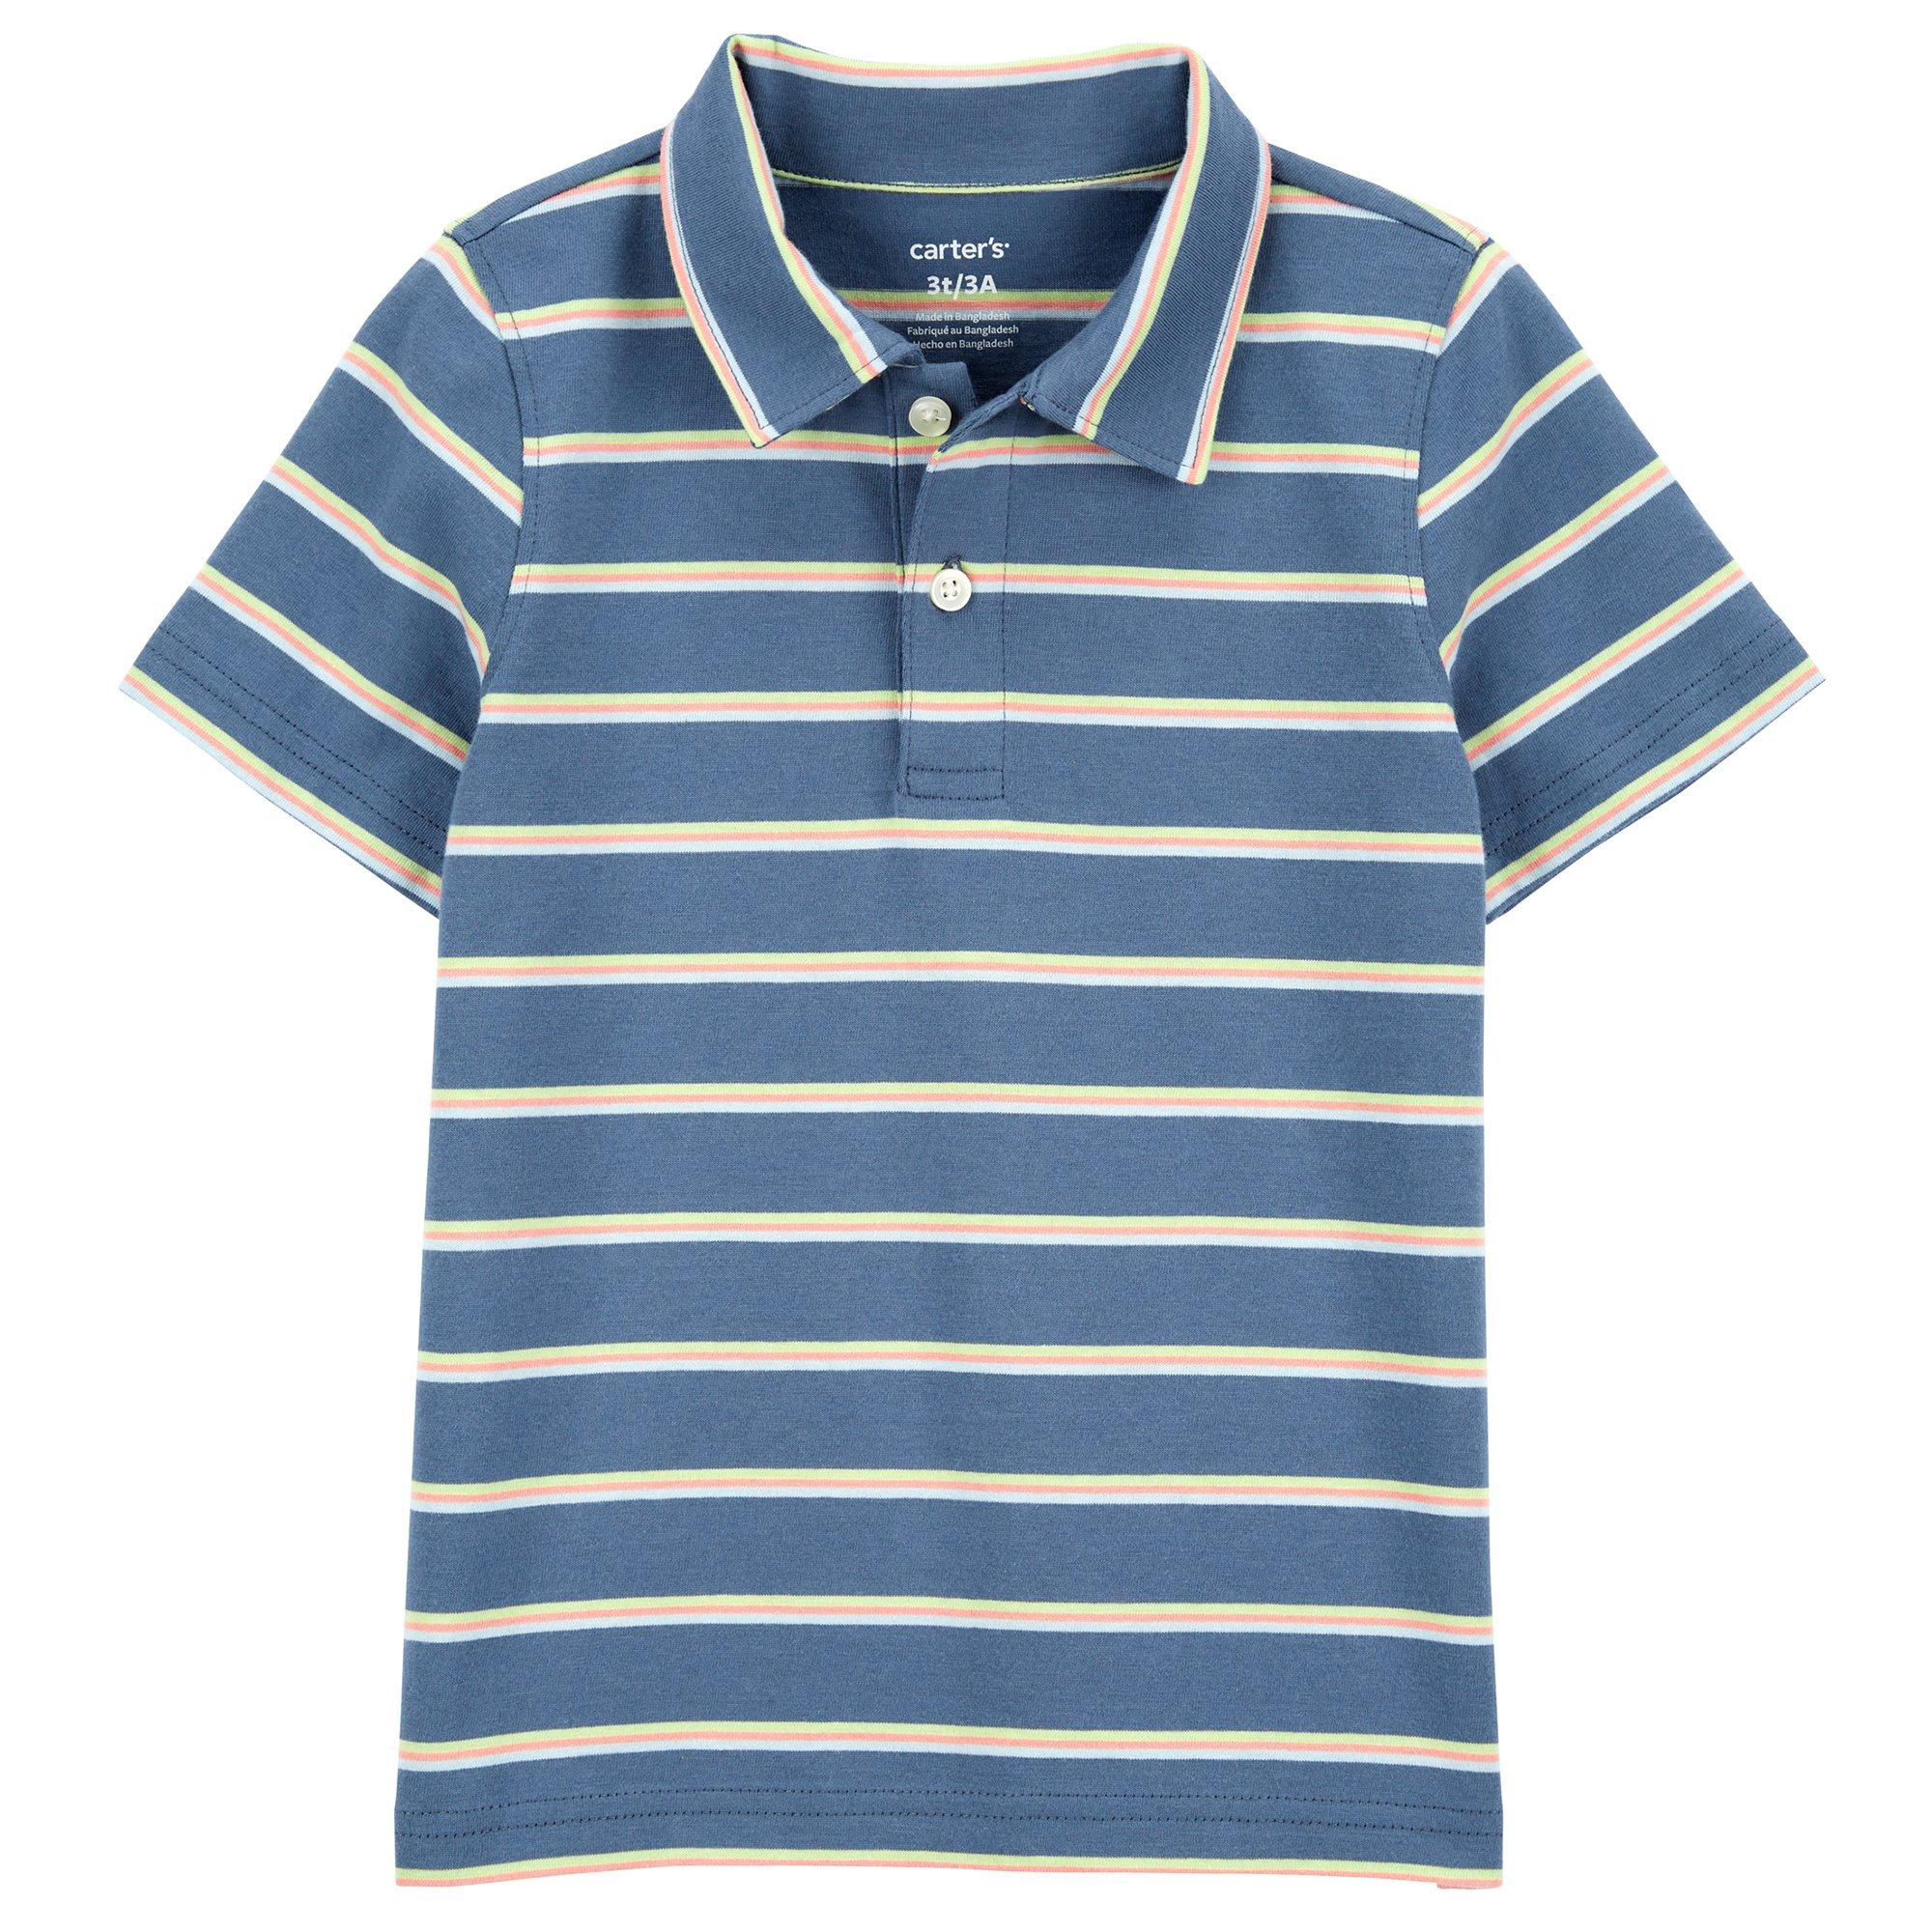 Carters Toddler Boys Striped Woven Button Up Shirts